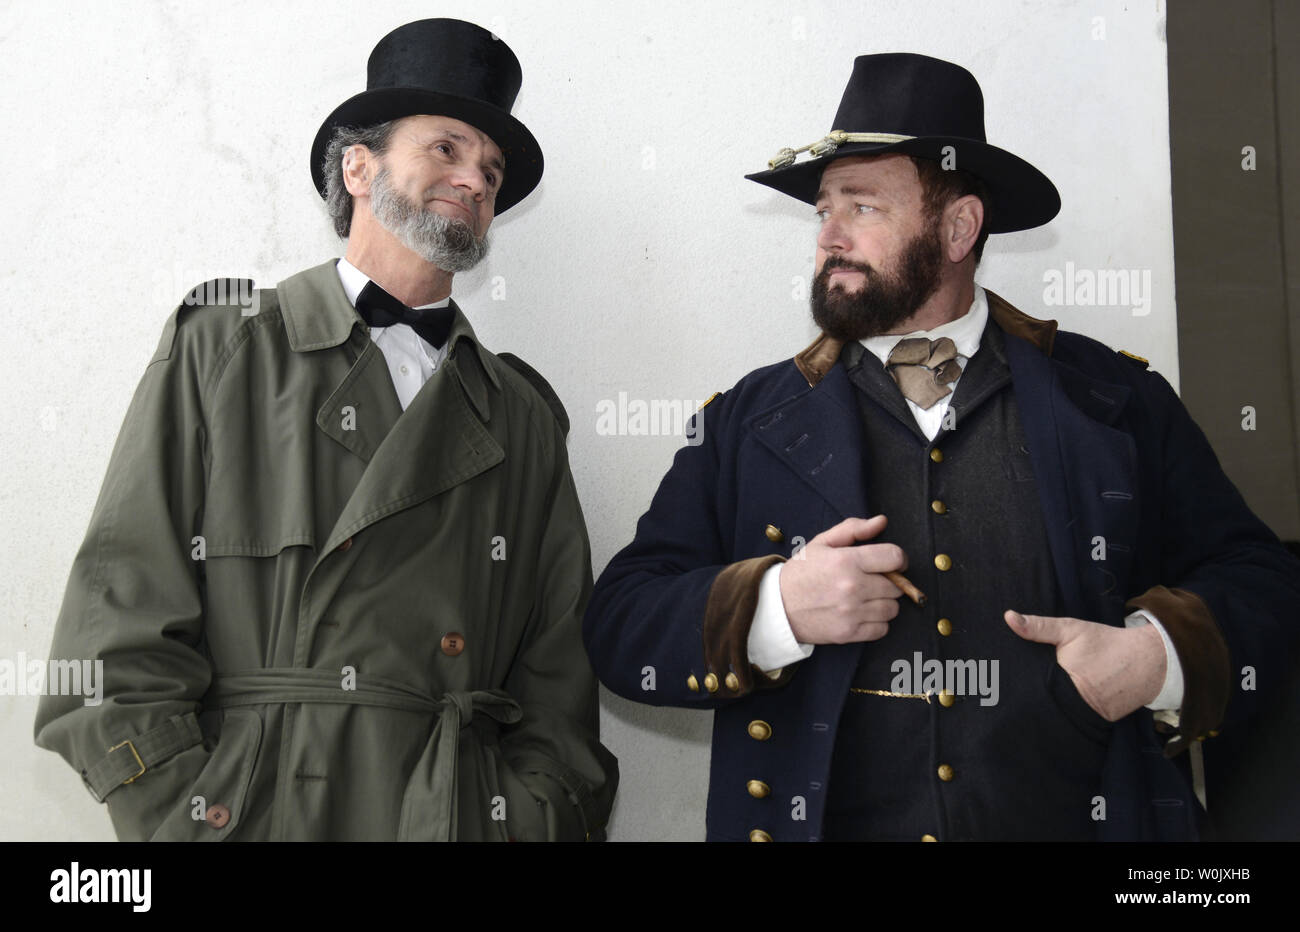 US President Abraham Lincoln re-enactor Greg Edwards (L) and Gen. Ulysses S. Grant re-enactor Kenneth Serfass chat during a National Park Service-hosted event to mark the 209th anniversary of Lincoln's birthday, February 12, 2018, at the Lincoln Memorial, in Washington, D.C. Considered one of America's greatest presidents, Lincoln is remembered for preserving the Union after the Civil War and freeing slaves with the Emancipation Proclamation.       Photo by Mike Theiler/UPI Stock Photo